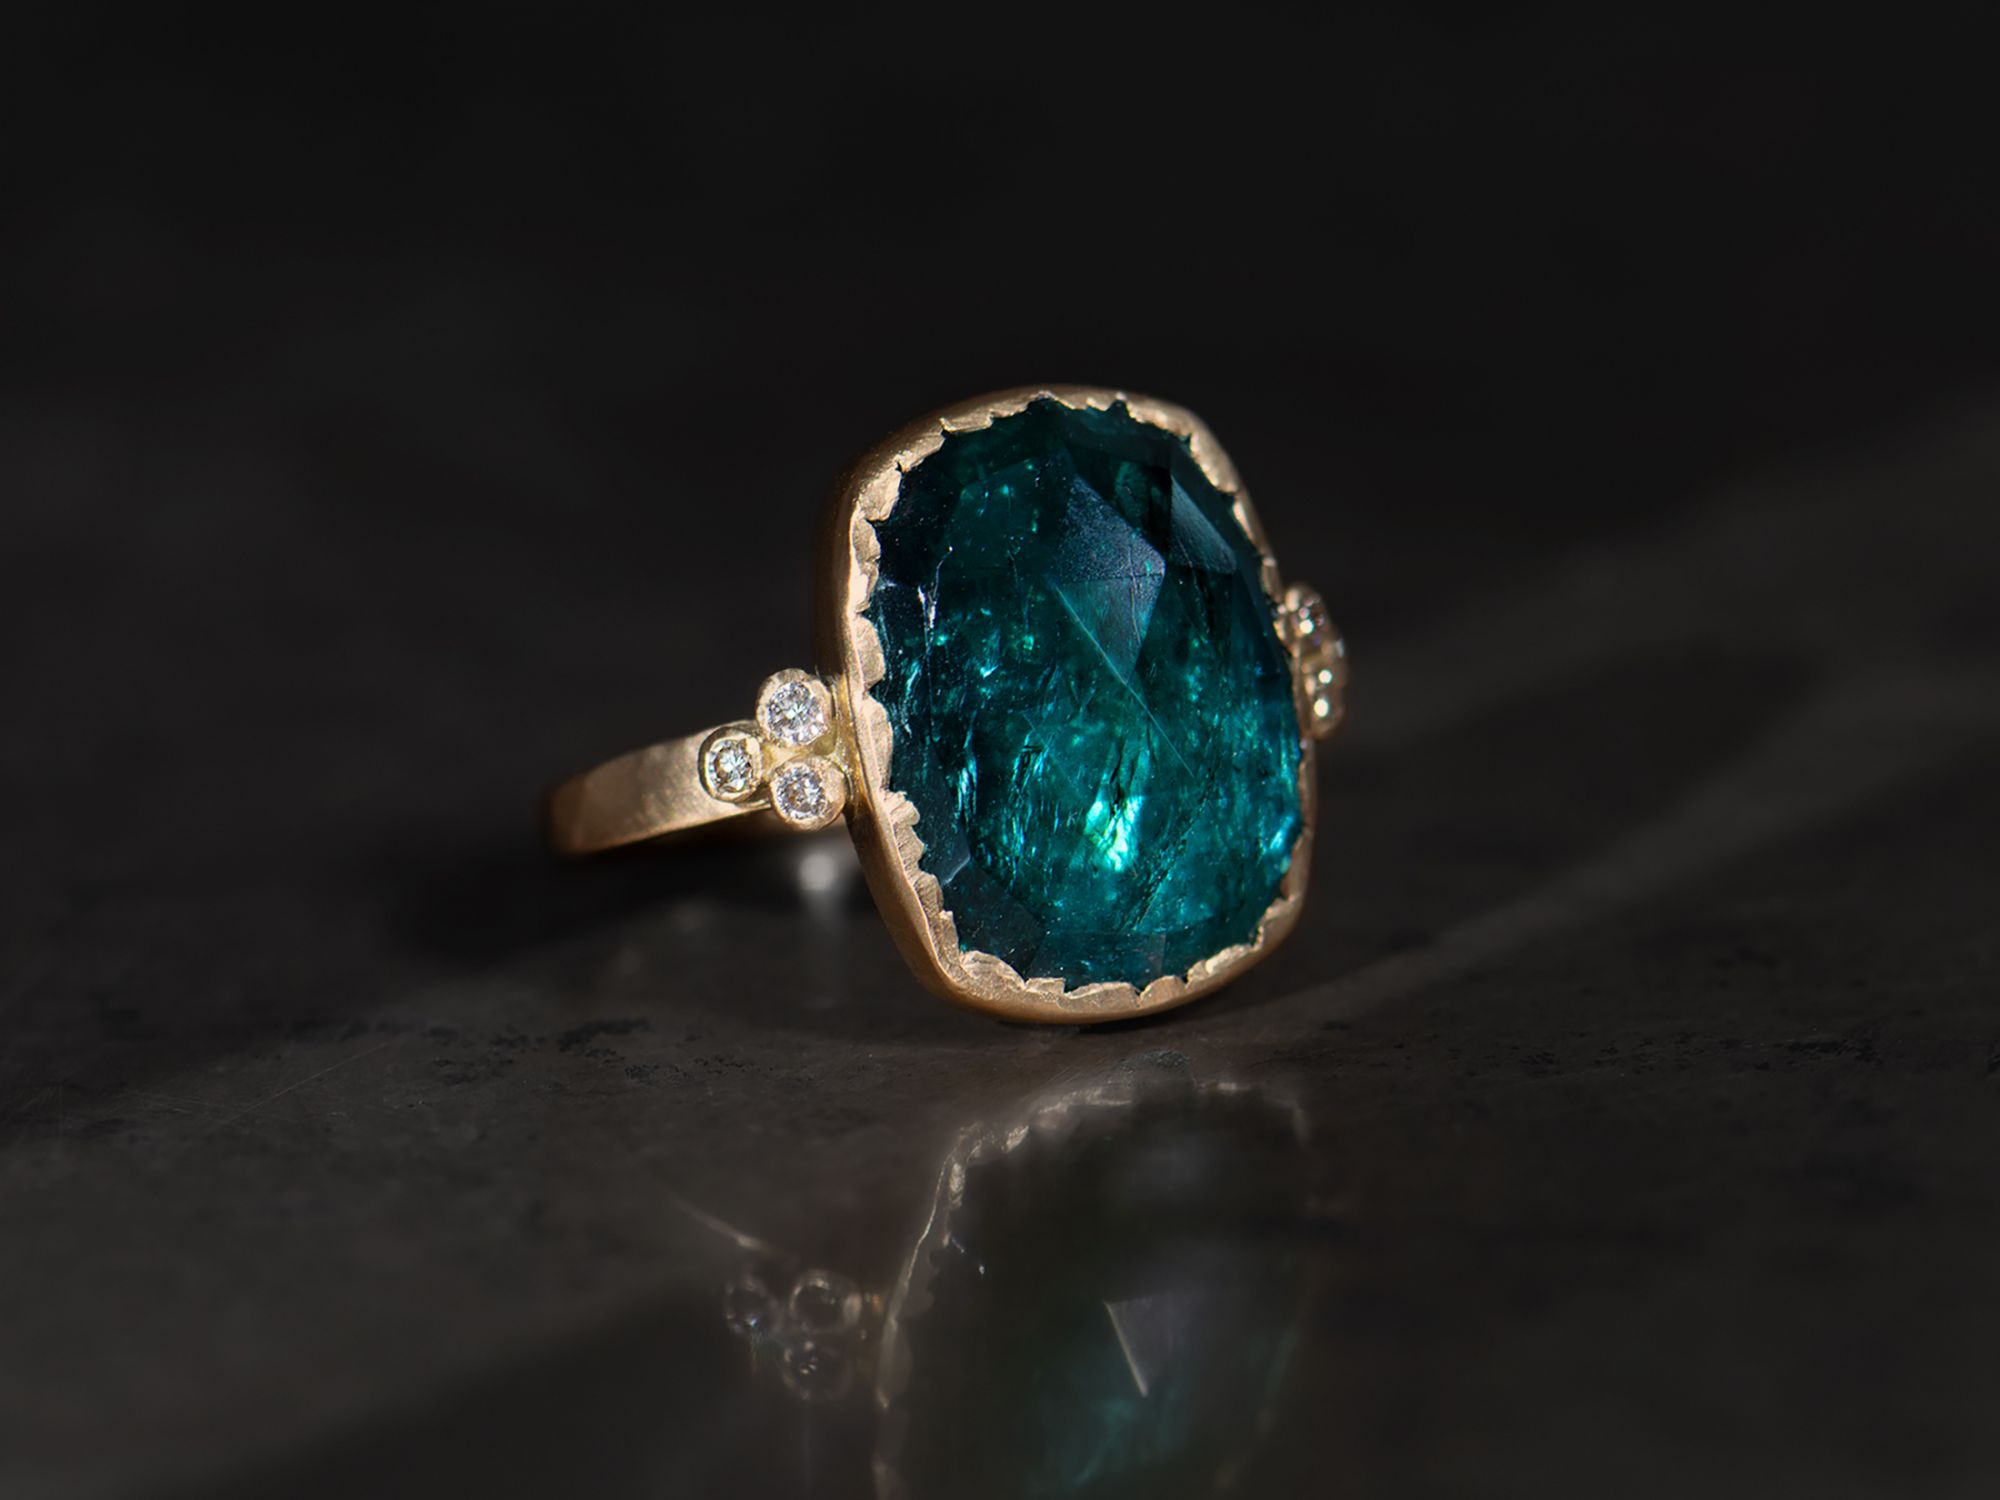 Queen honey diamonds and 8,73cts green tourmaline and 18k gold ring by Emmanuelle Zysman